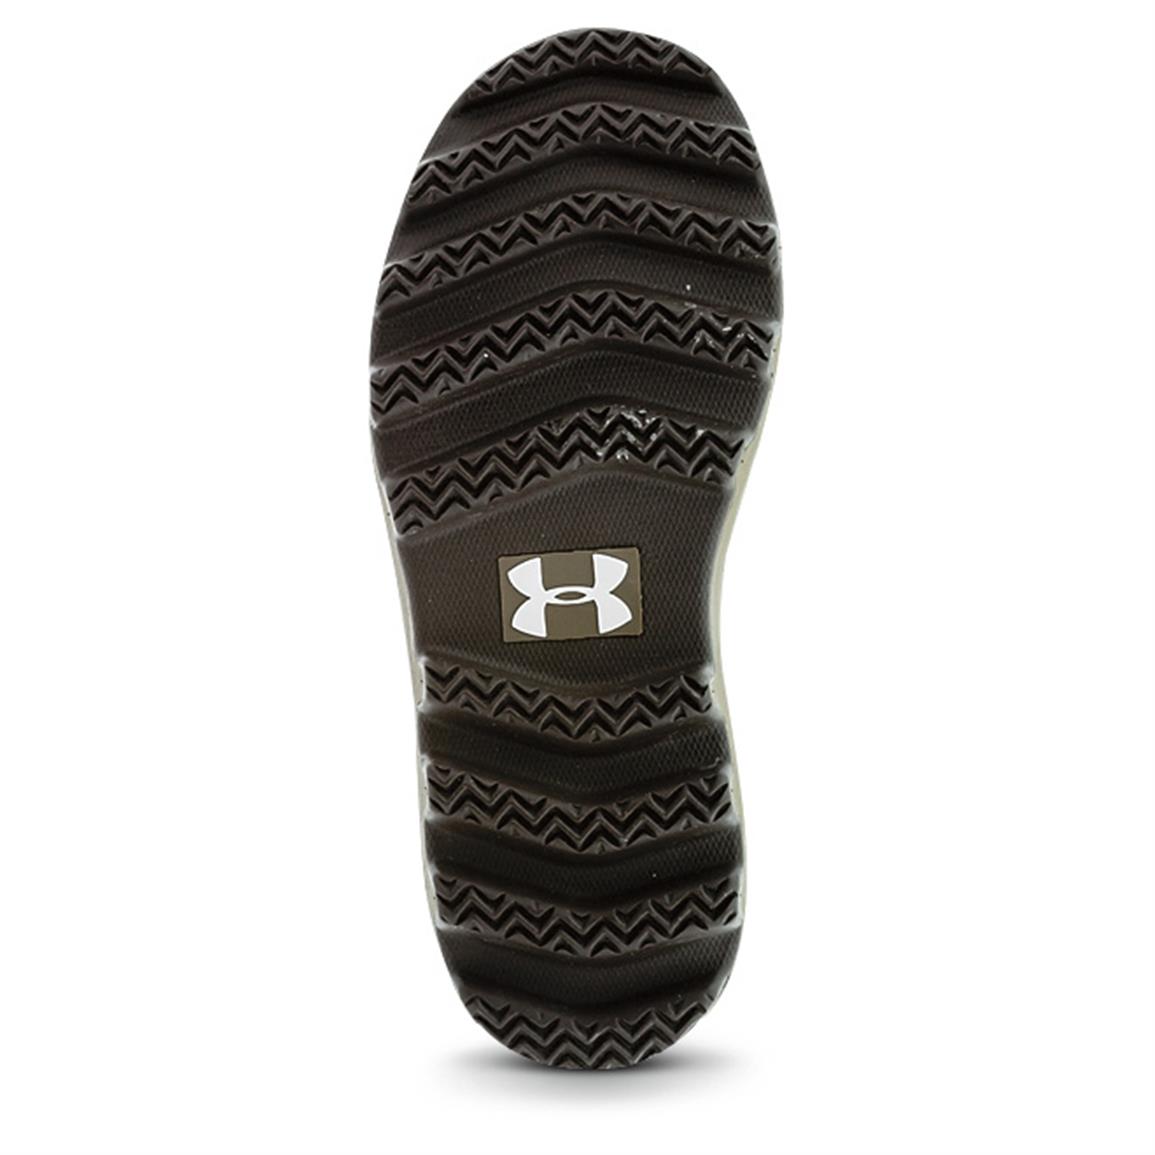 under armour women's snow boots